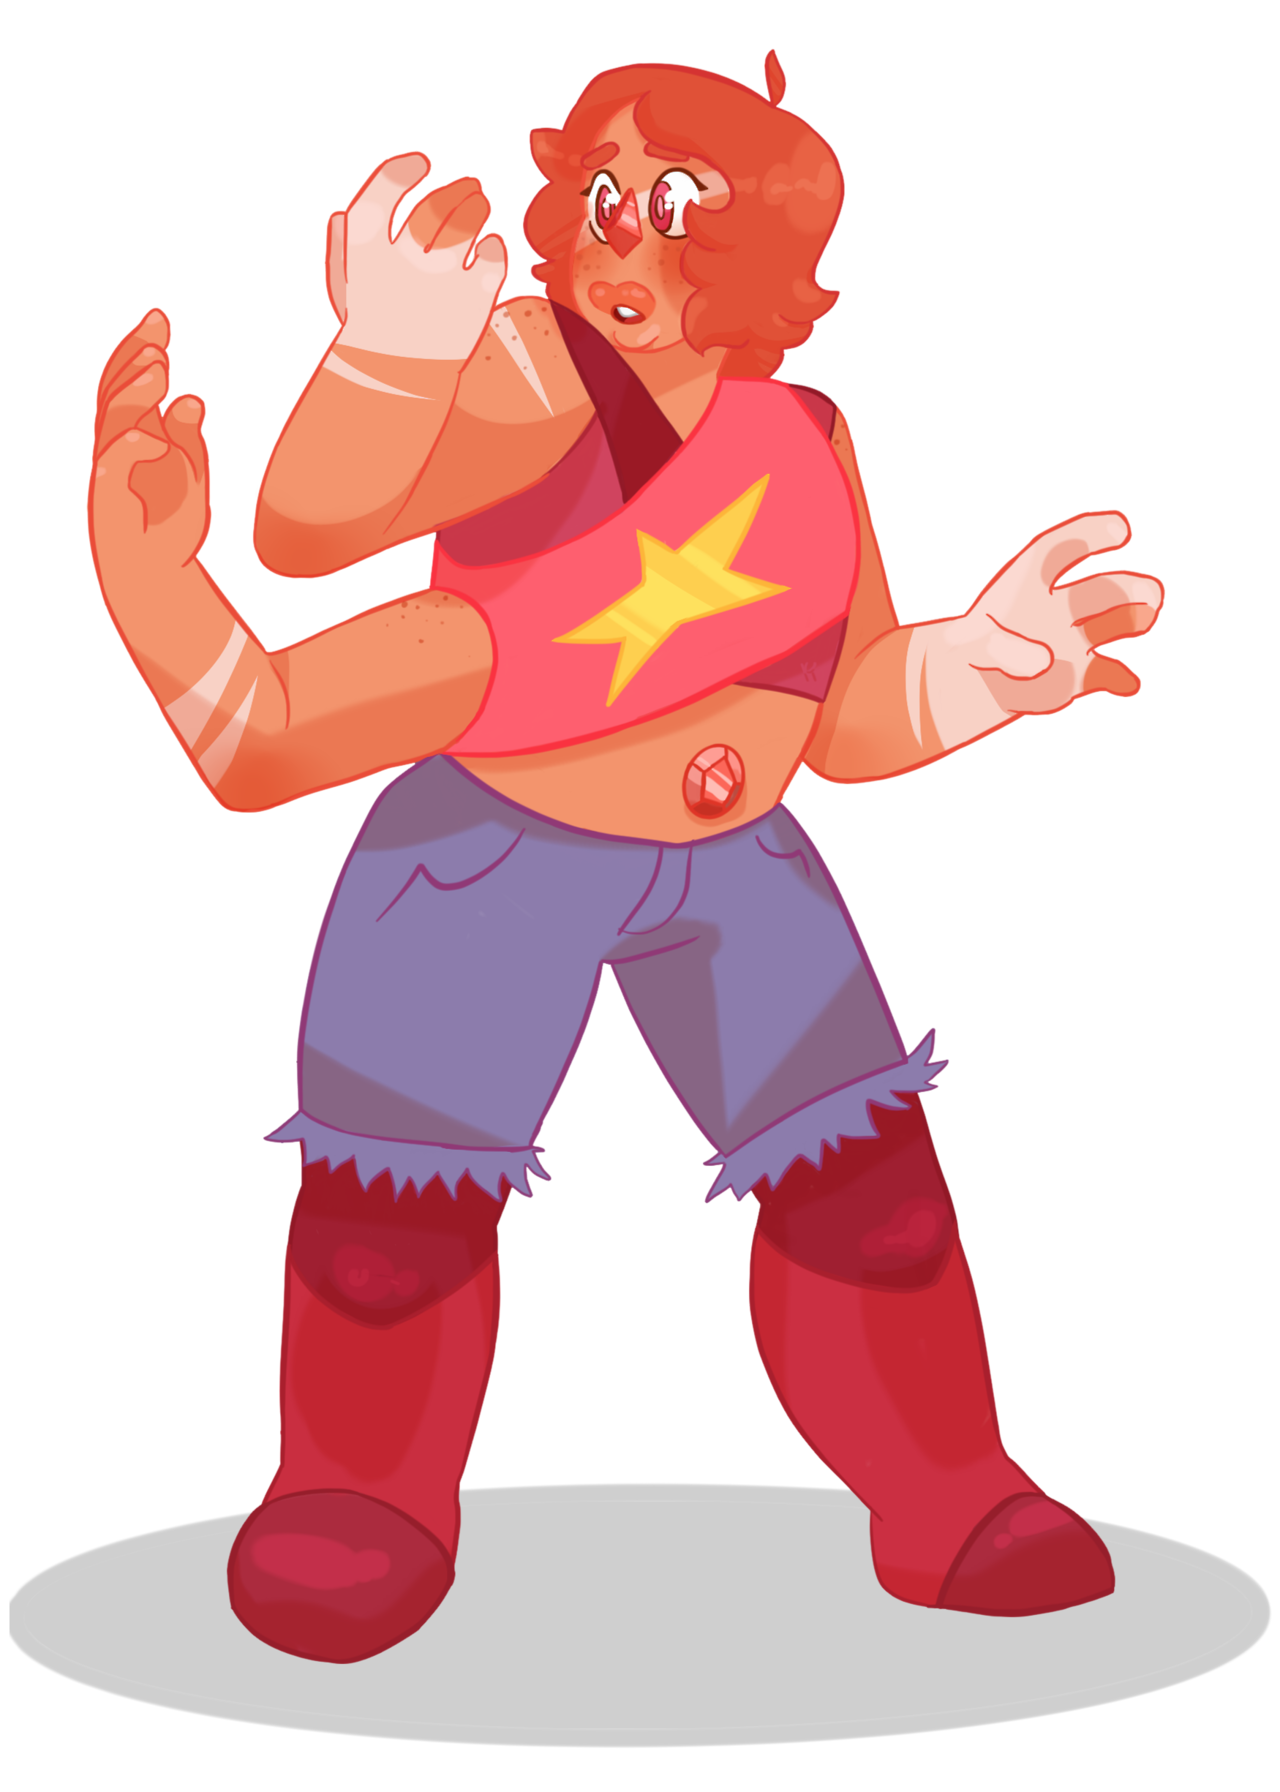 Here’s Peach Quartz! A fusion between Jasper and Steven, they’re actually a big sweetheart, despite how harsh Jasper is. Sorry I haven’t been posting, school just started and I have a bunch of AP art...